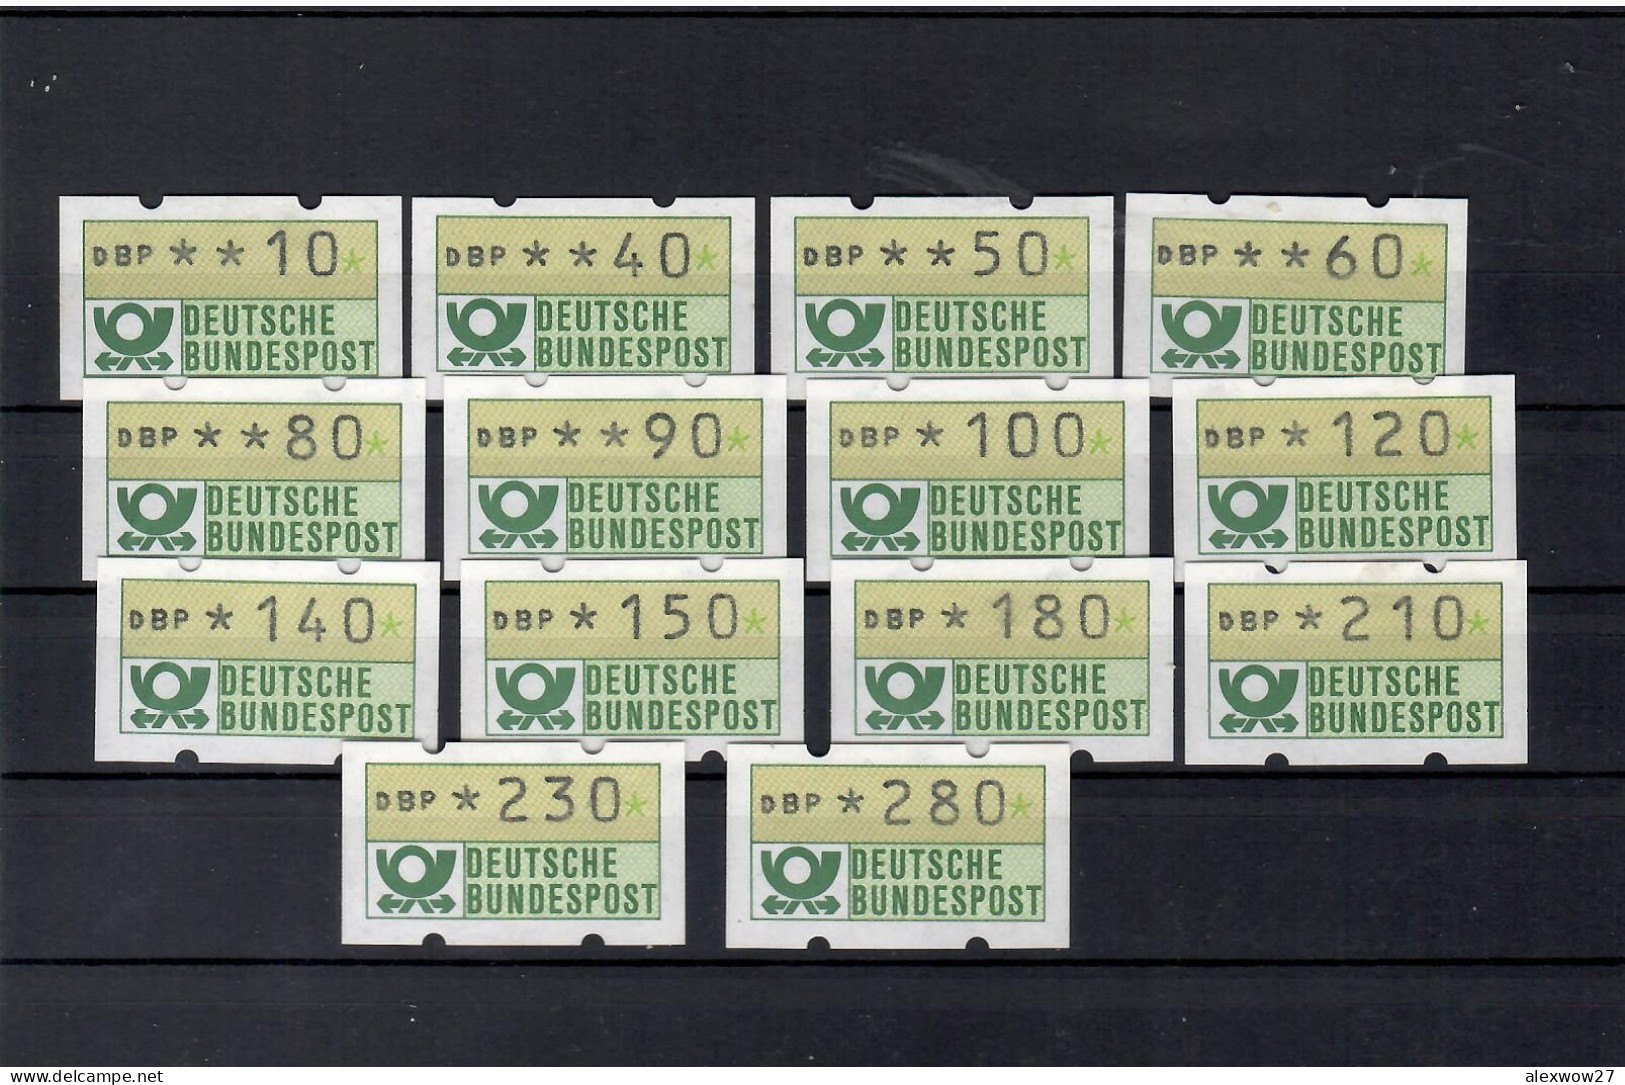 Germany 1981... 14 ATM / AUTOMATIC - Machine Labels [ATM]